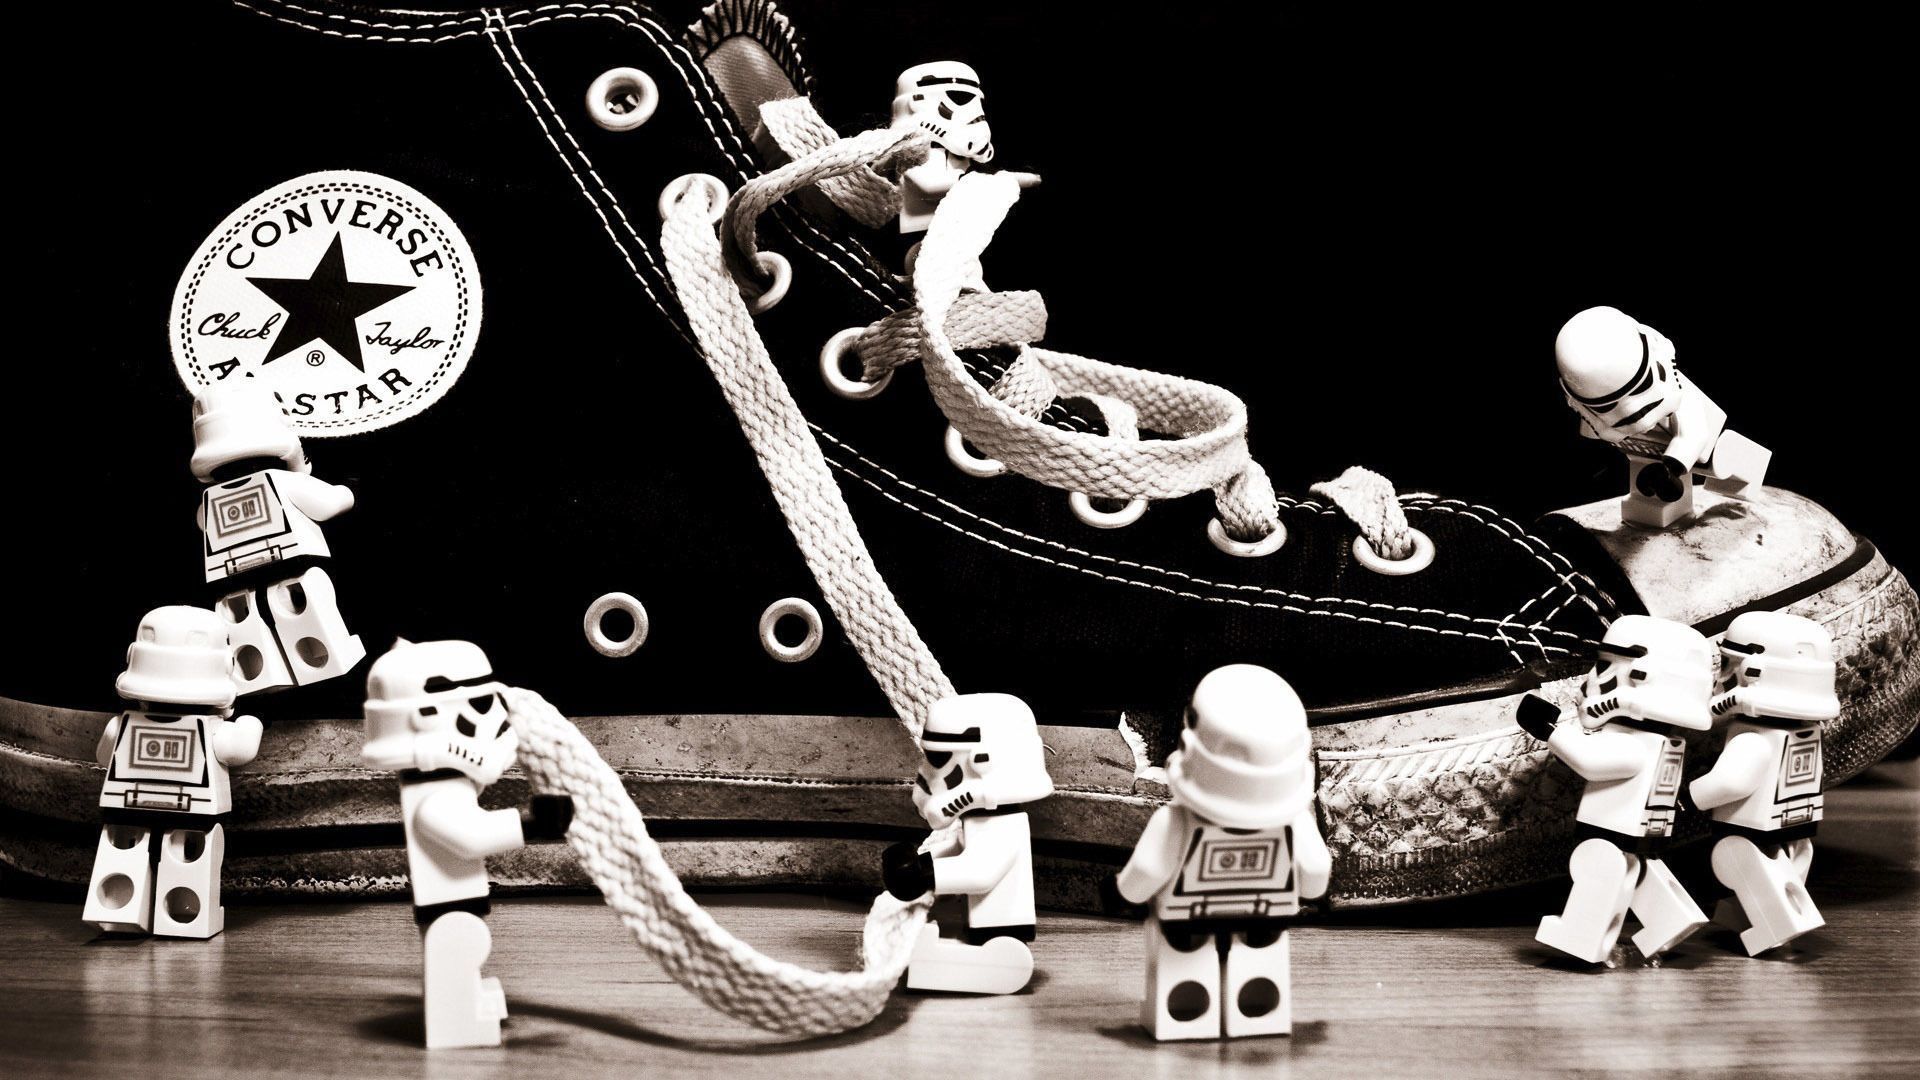 Stormtroopers playing with a sneaker wallpaper - Free Wide HD